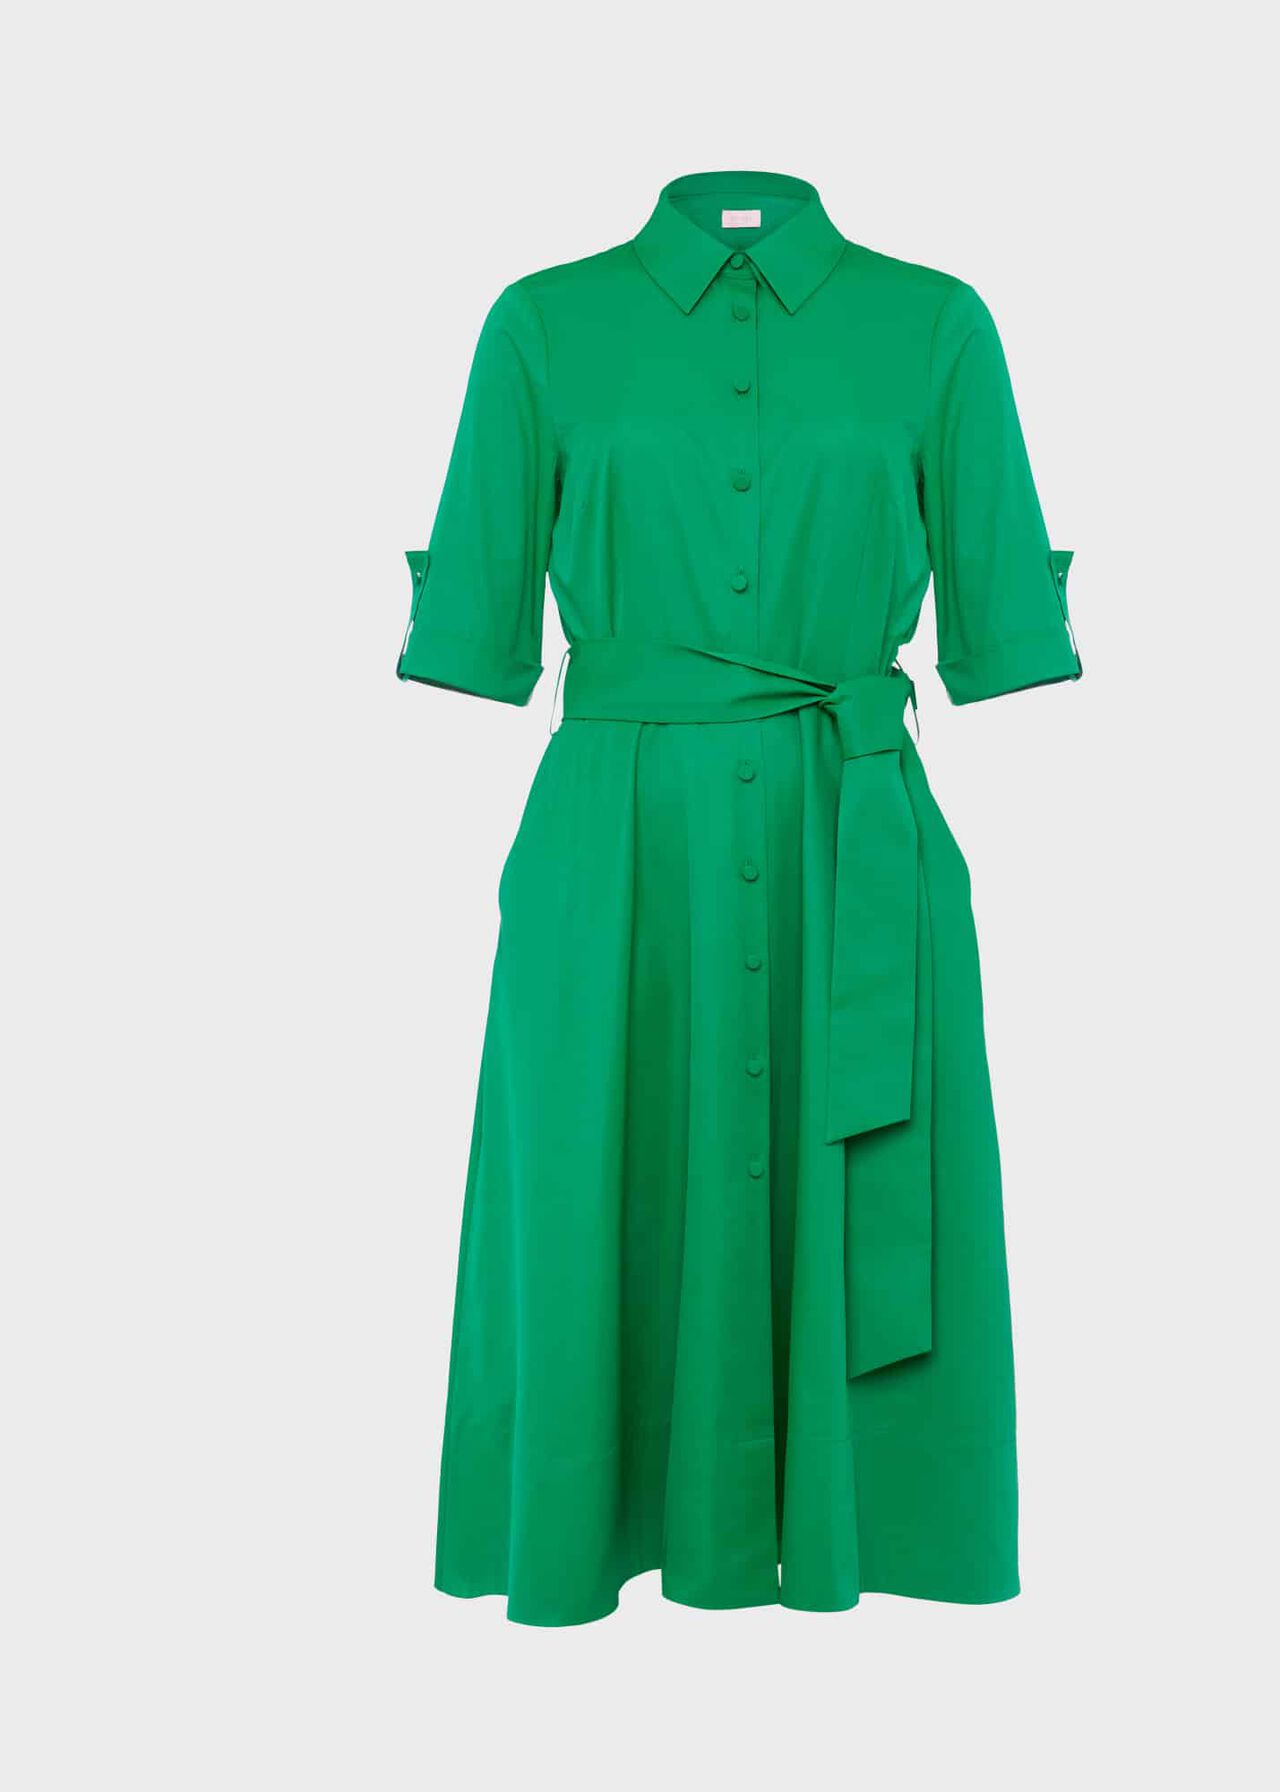 Tyra Belted Dress, Amazon Green, hi-res